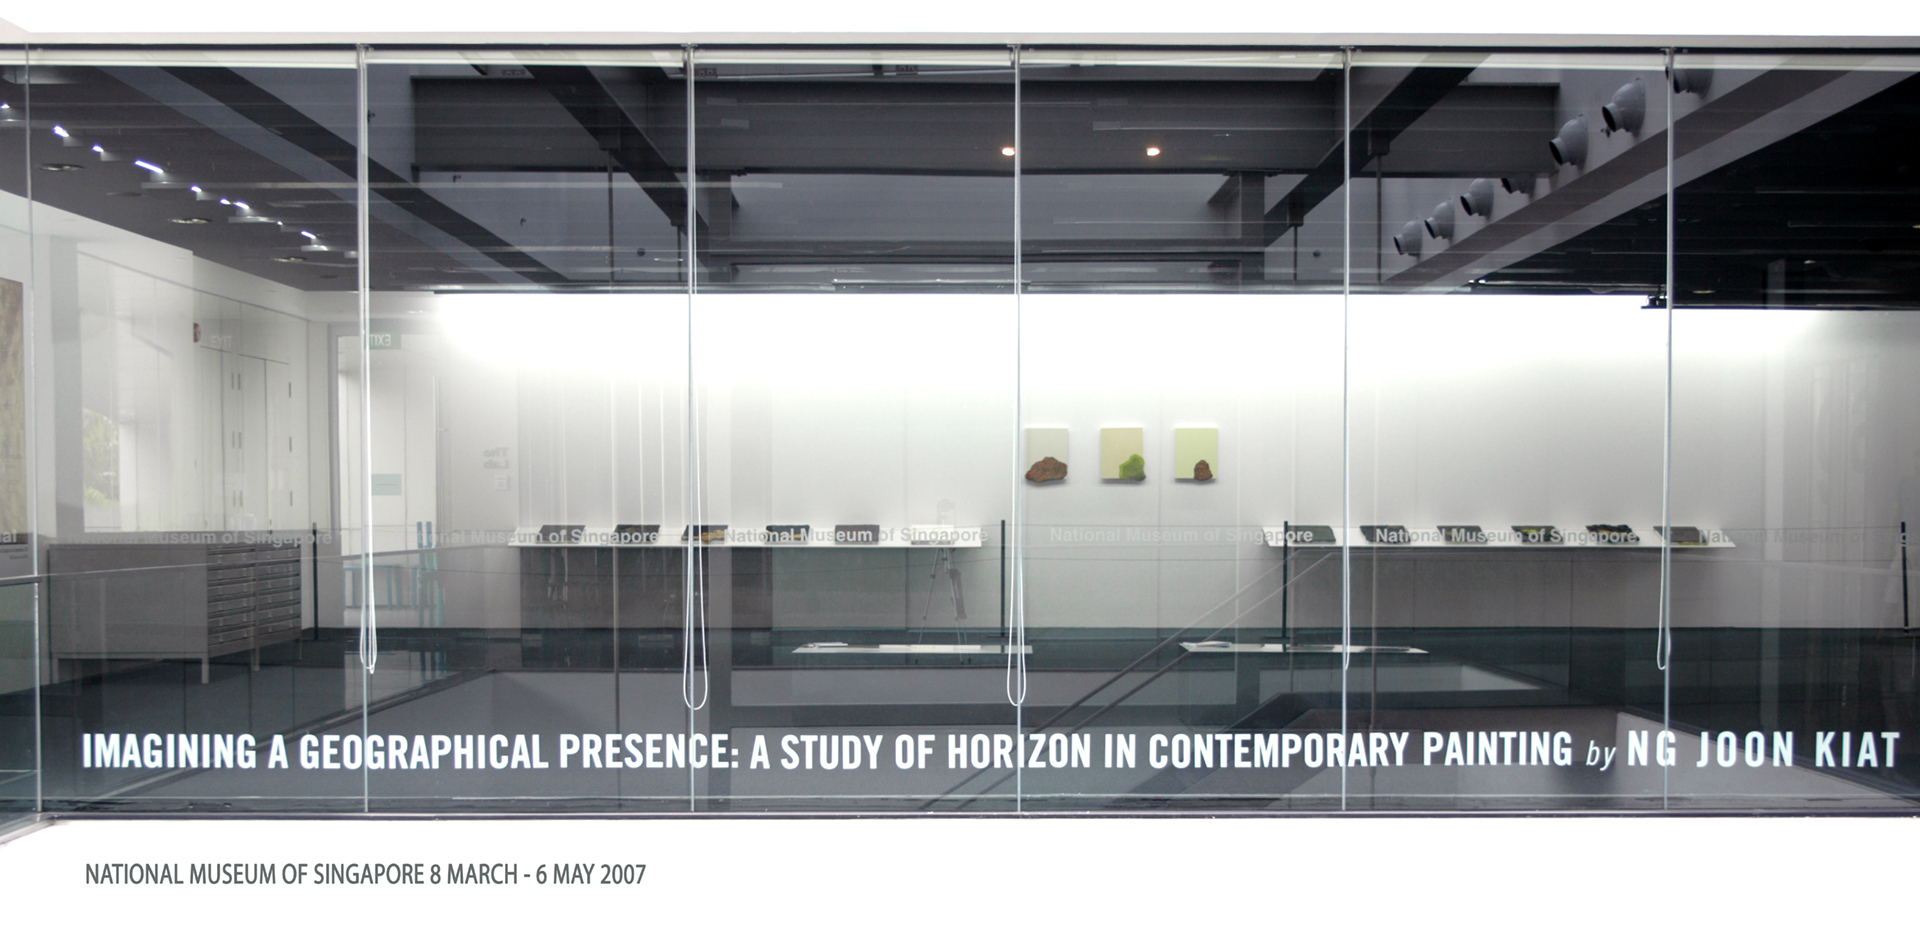 photo of exhibtion: Imagining a Geographical Presence: 
A Study of the Horizon in Contemporary Painting